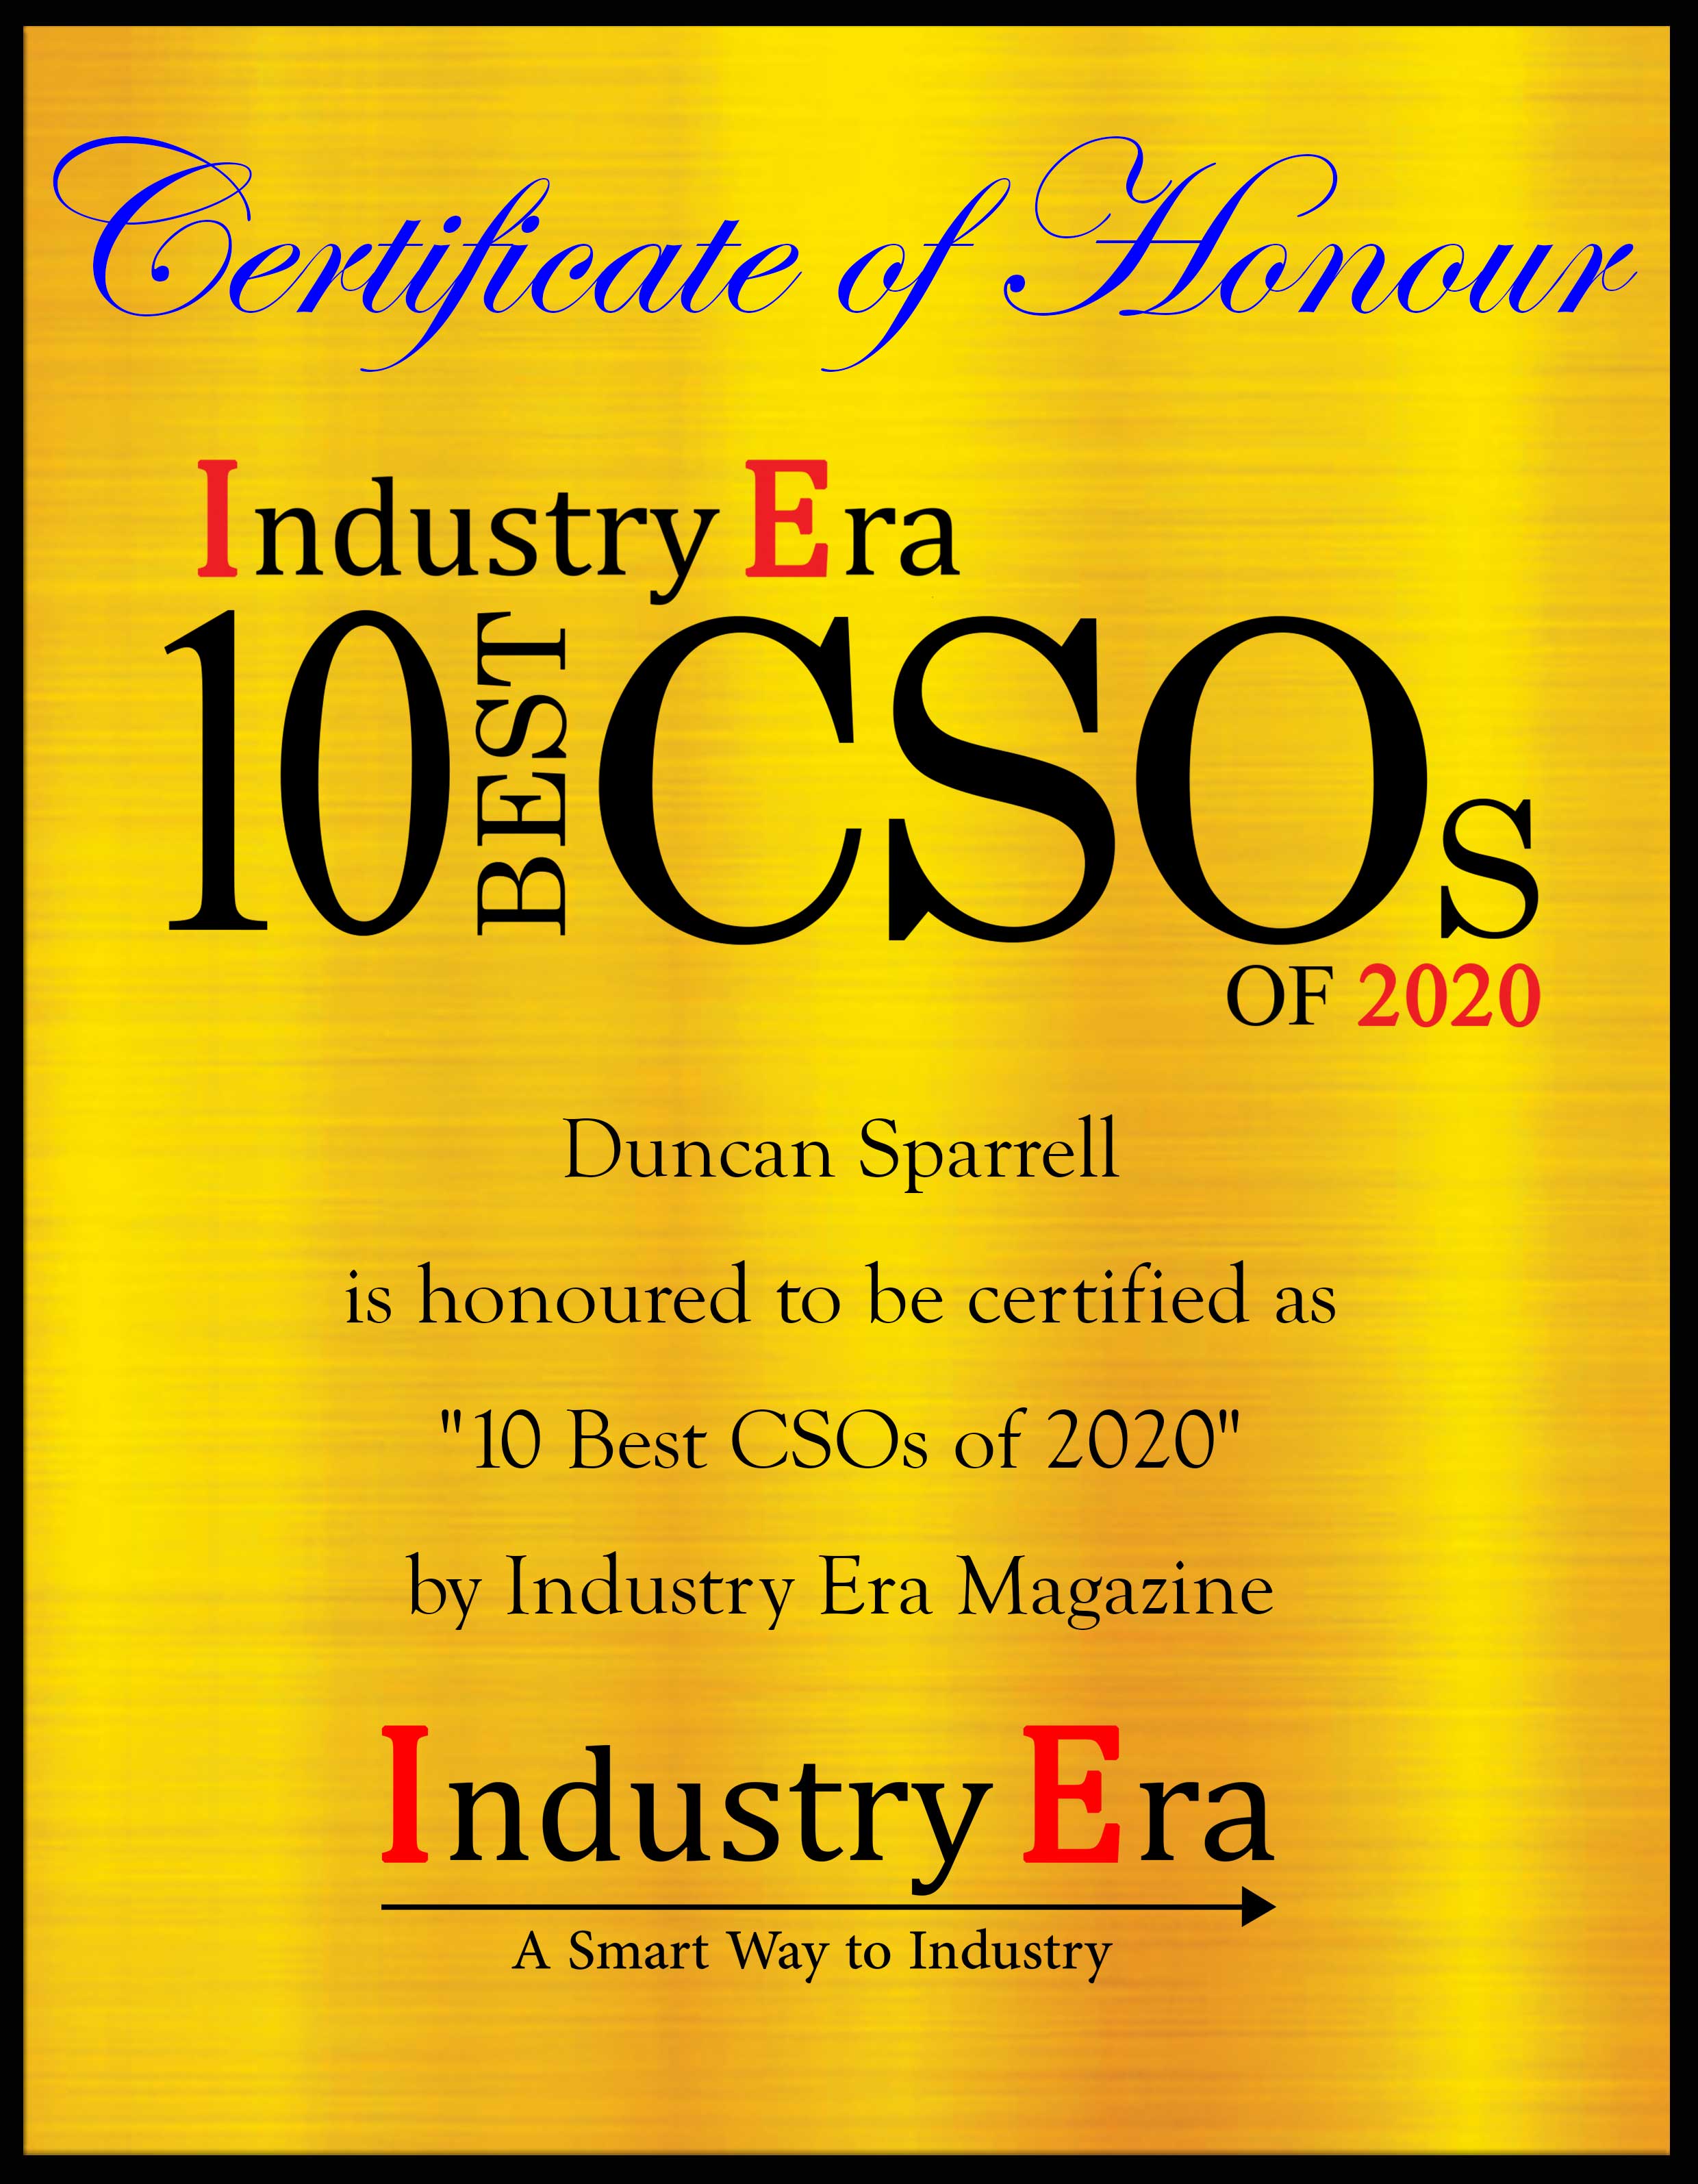 Duncan Sparrell, CSO of sFractal Consulting LLc Certificate